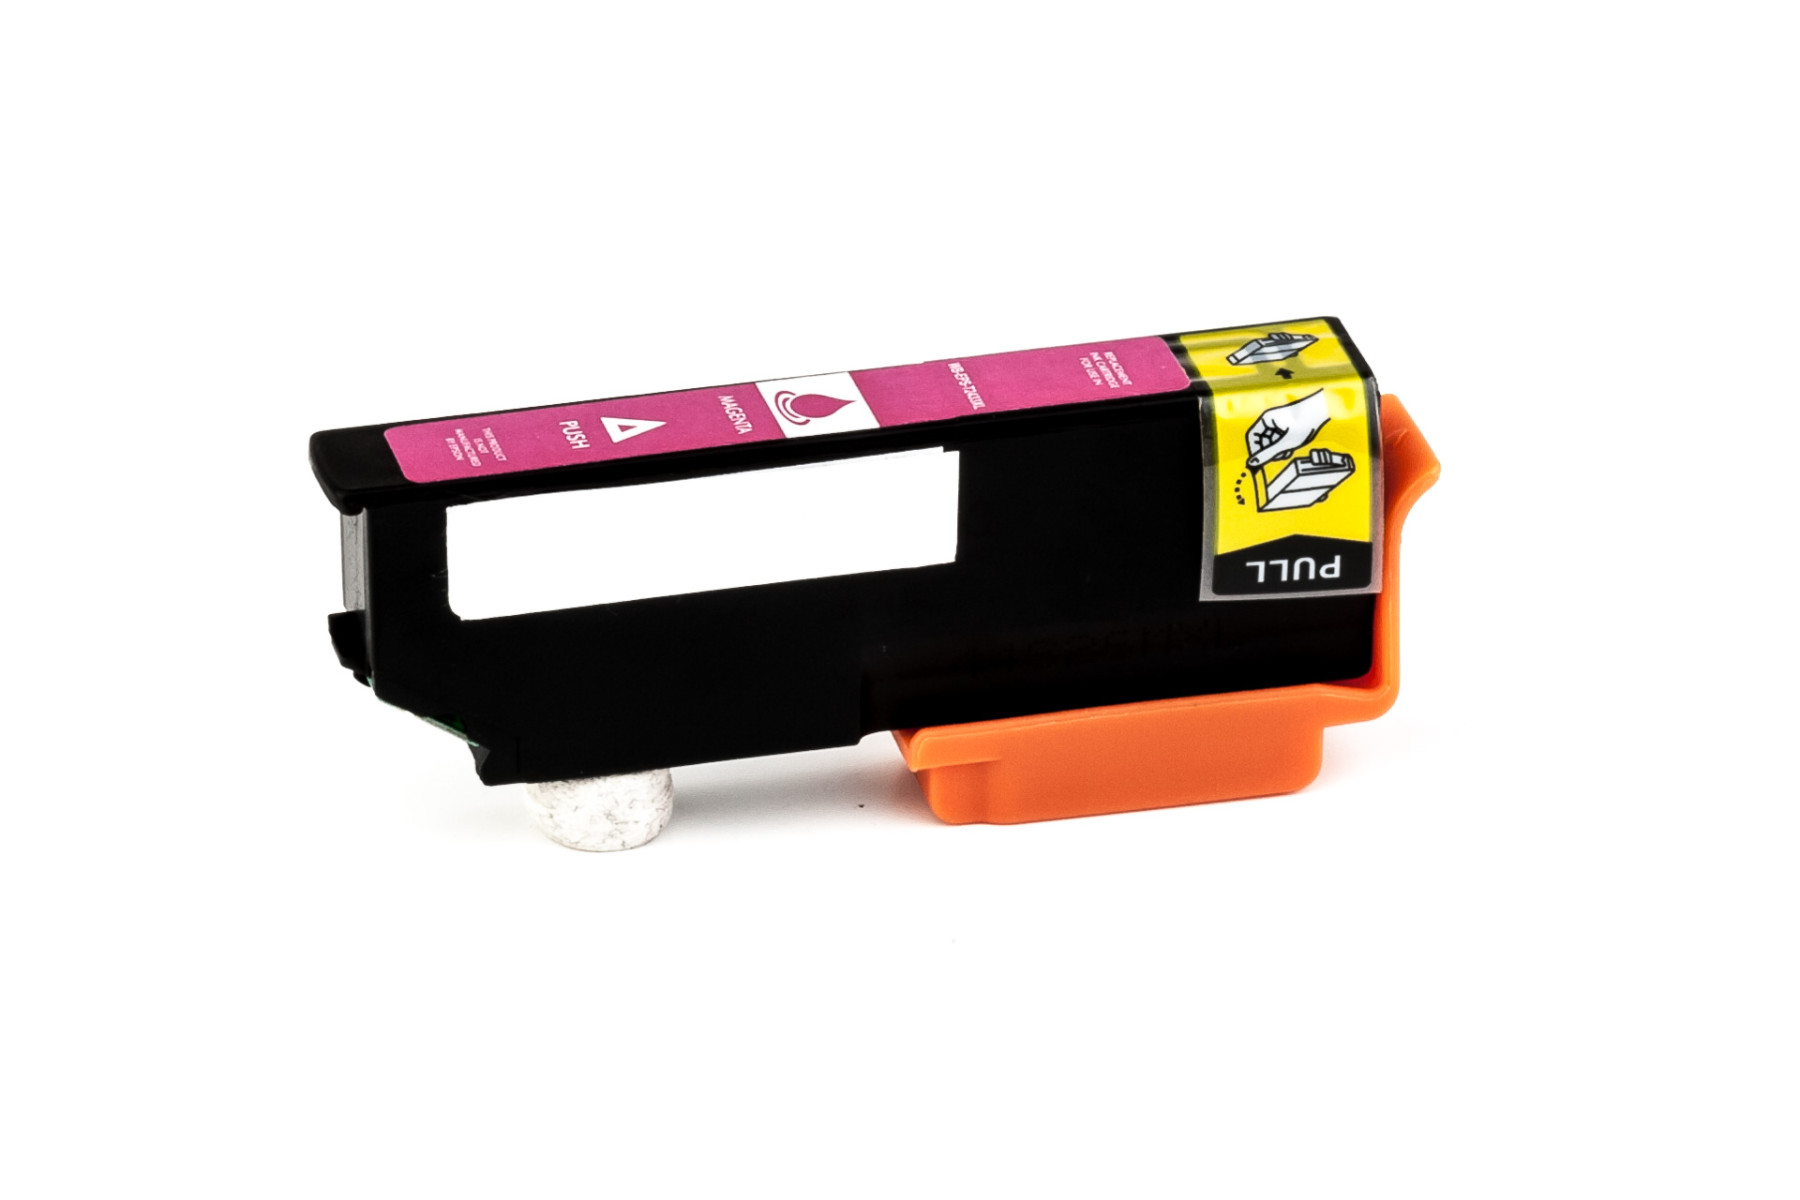 Set consisting of Ink cartridge (alternative) compatible with Epson - C13T24314010/C 13 T 24314010 - 24XL - Expression Photo XP 750 black, C13T24324010/C 13 T 24324010 - 24XL - Expression Photo XP 750 cyan, C13T24334010/C 13 T 24334010 - 24XL - Expression